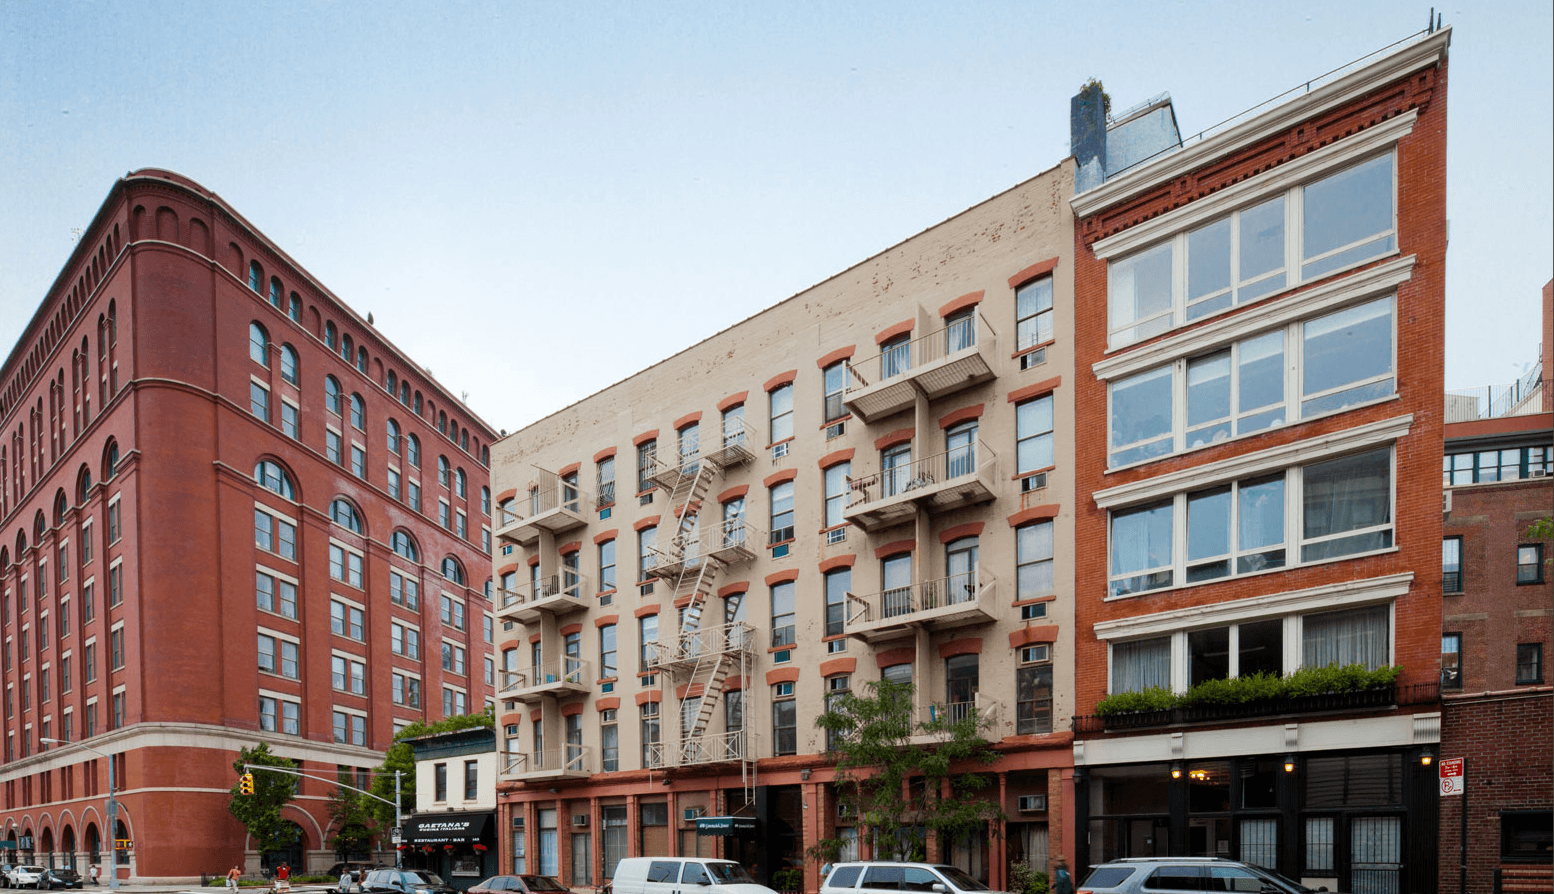 New York * Apartment for Rent * West Village * Call Realtor Ande Sedwick 615-522-8694 * Duplex Loft Outdoor Space - $4350 / month